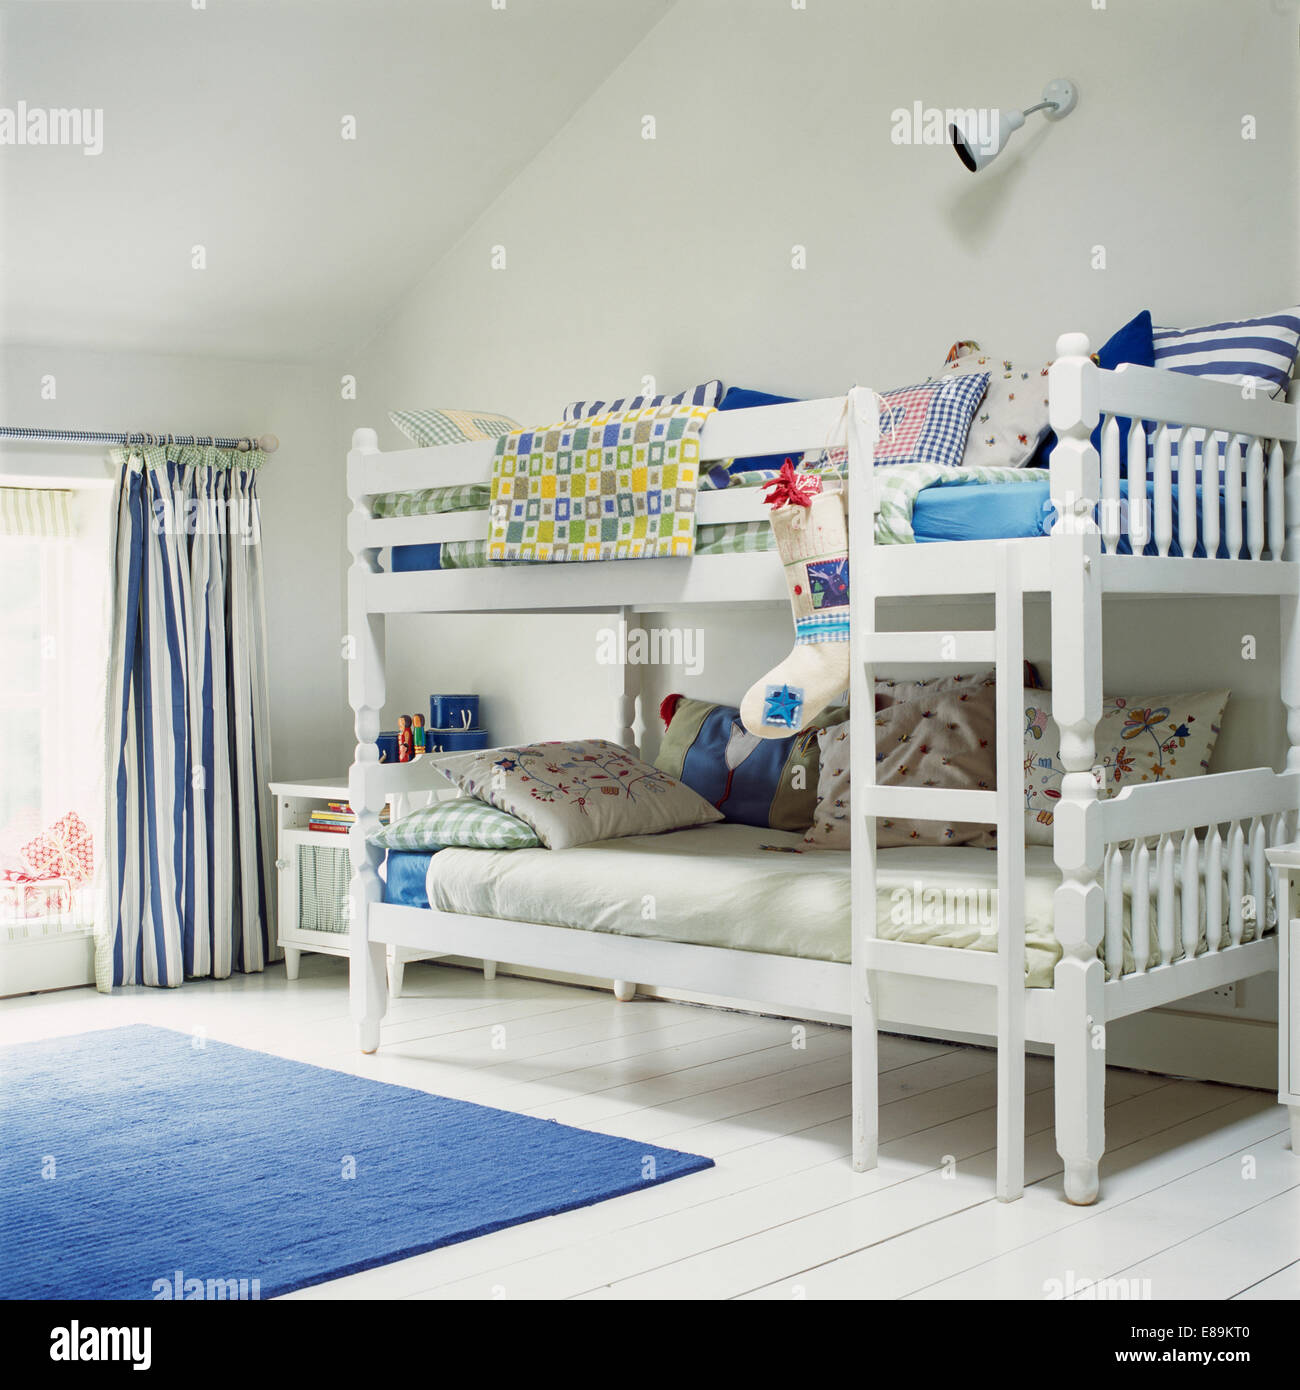 Christmas stocking on white bunk beds piled with cushions in children's white attic bedroom with blue rug on white floor Stock Photo